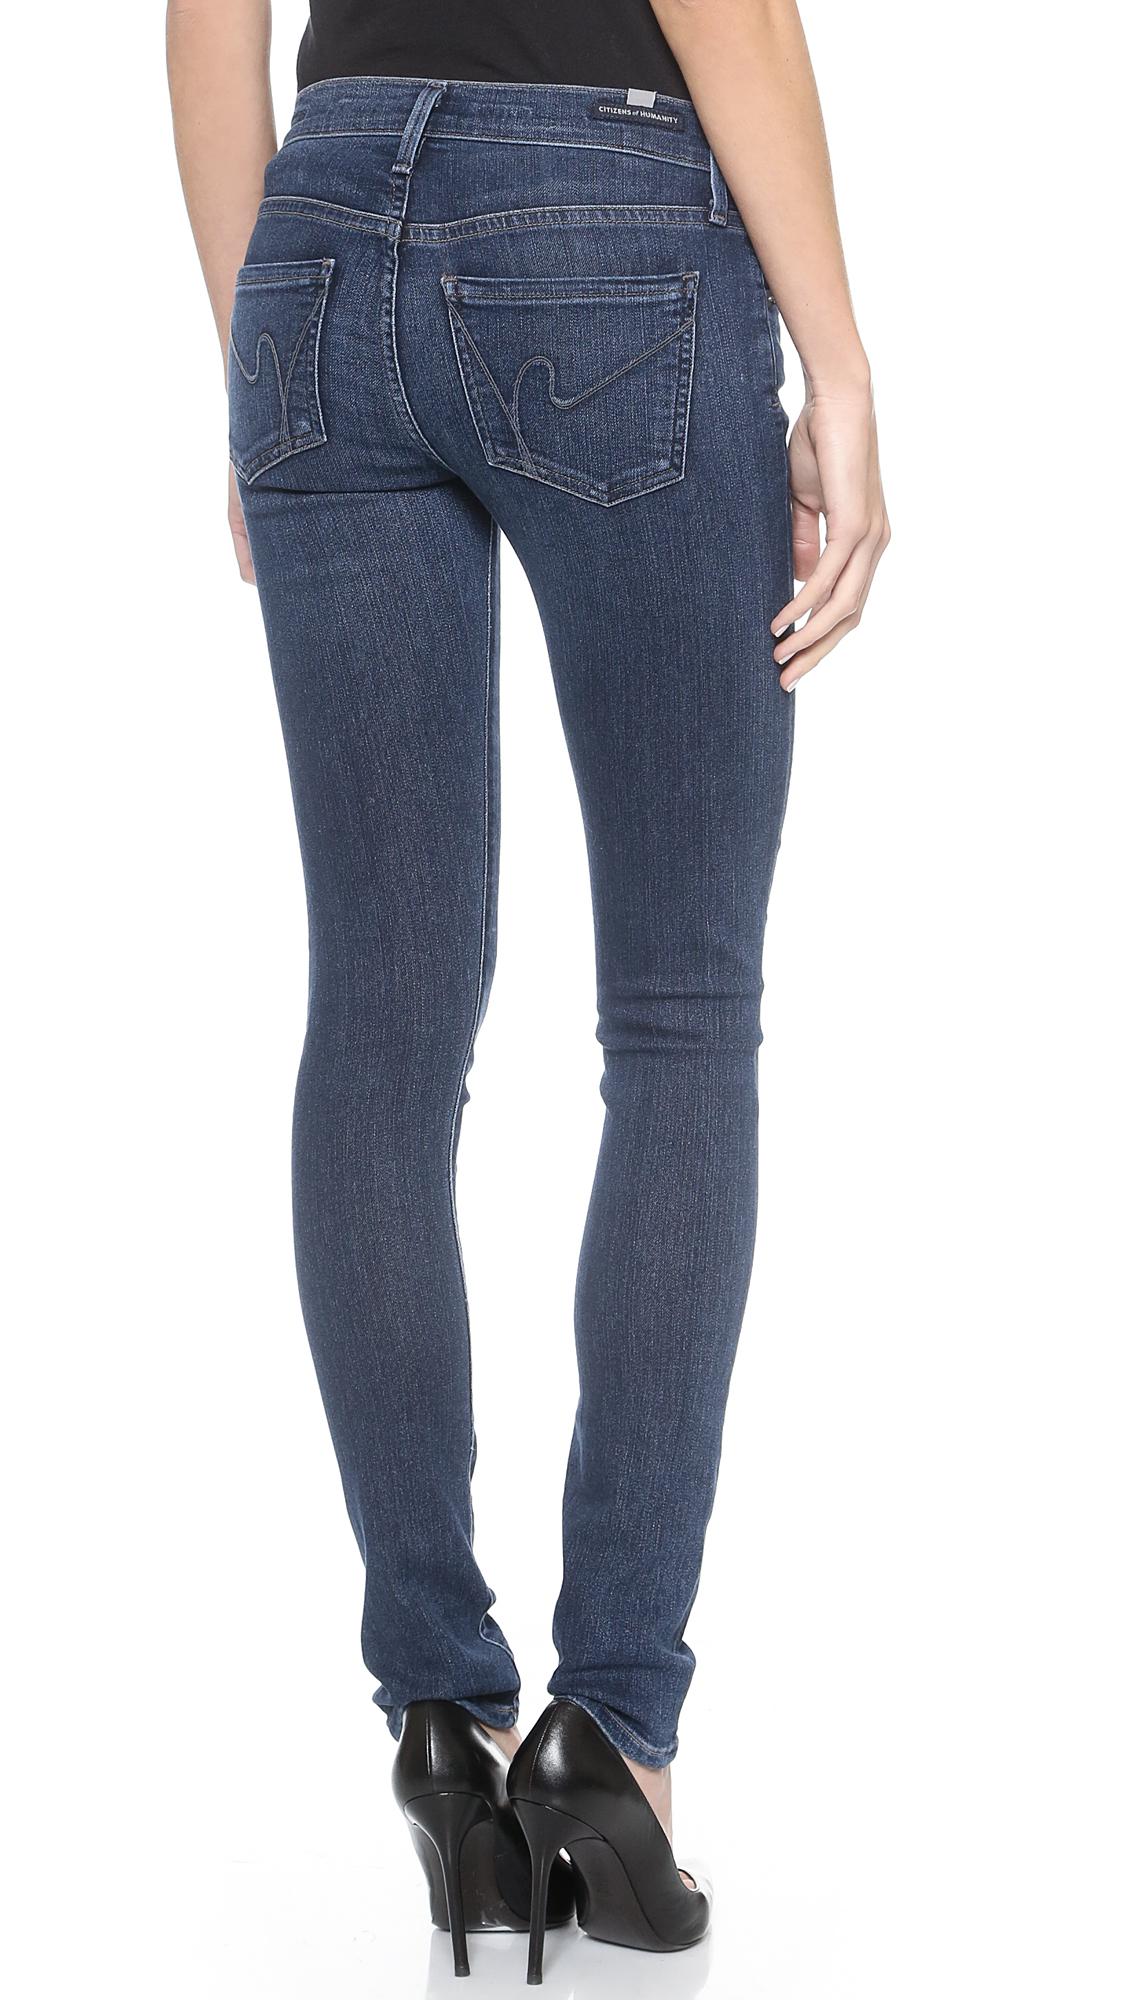 Lyst - Citizens Of Humanity Avedon Skinny Jeans in Blue